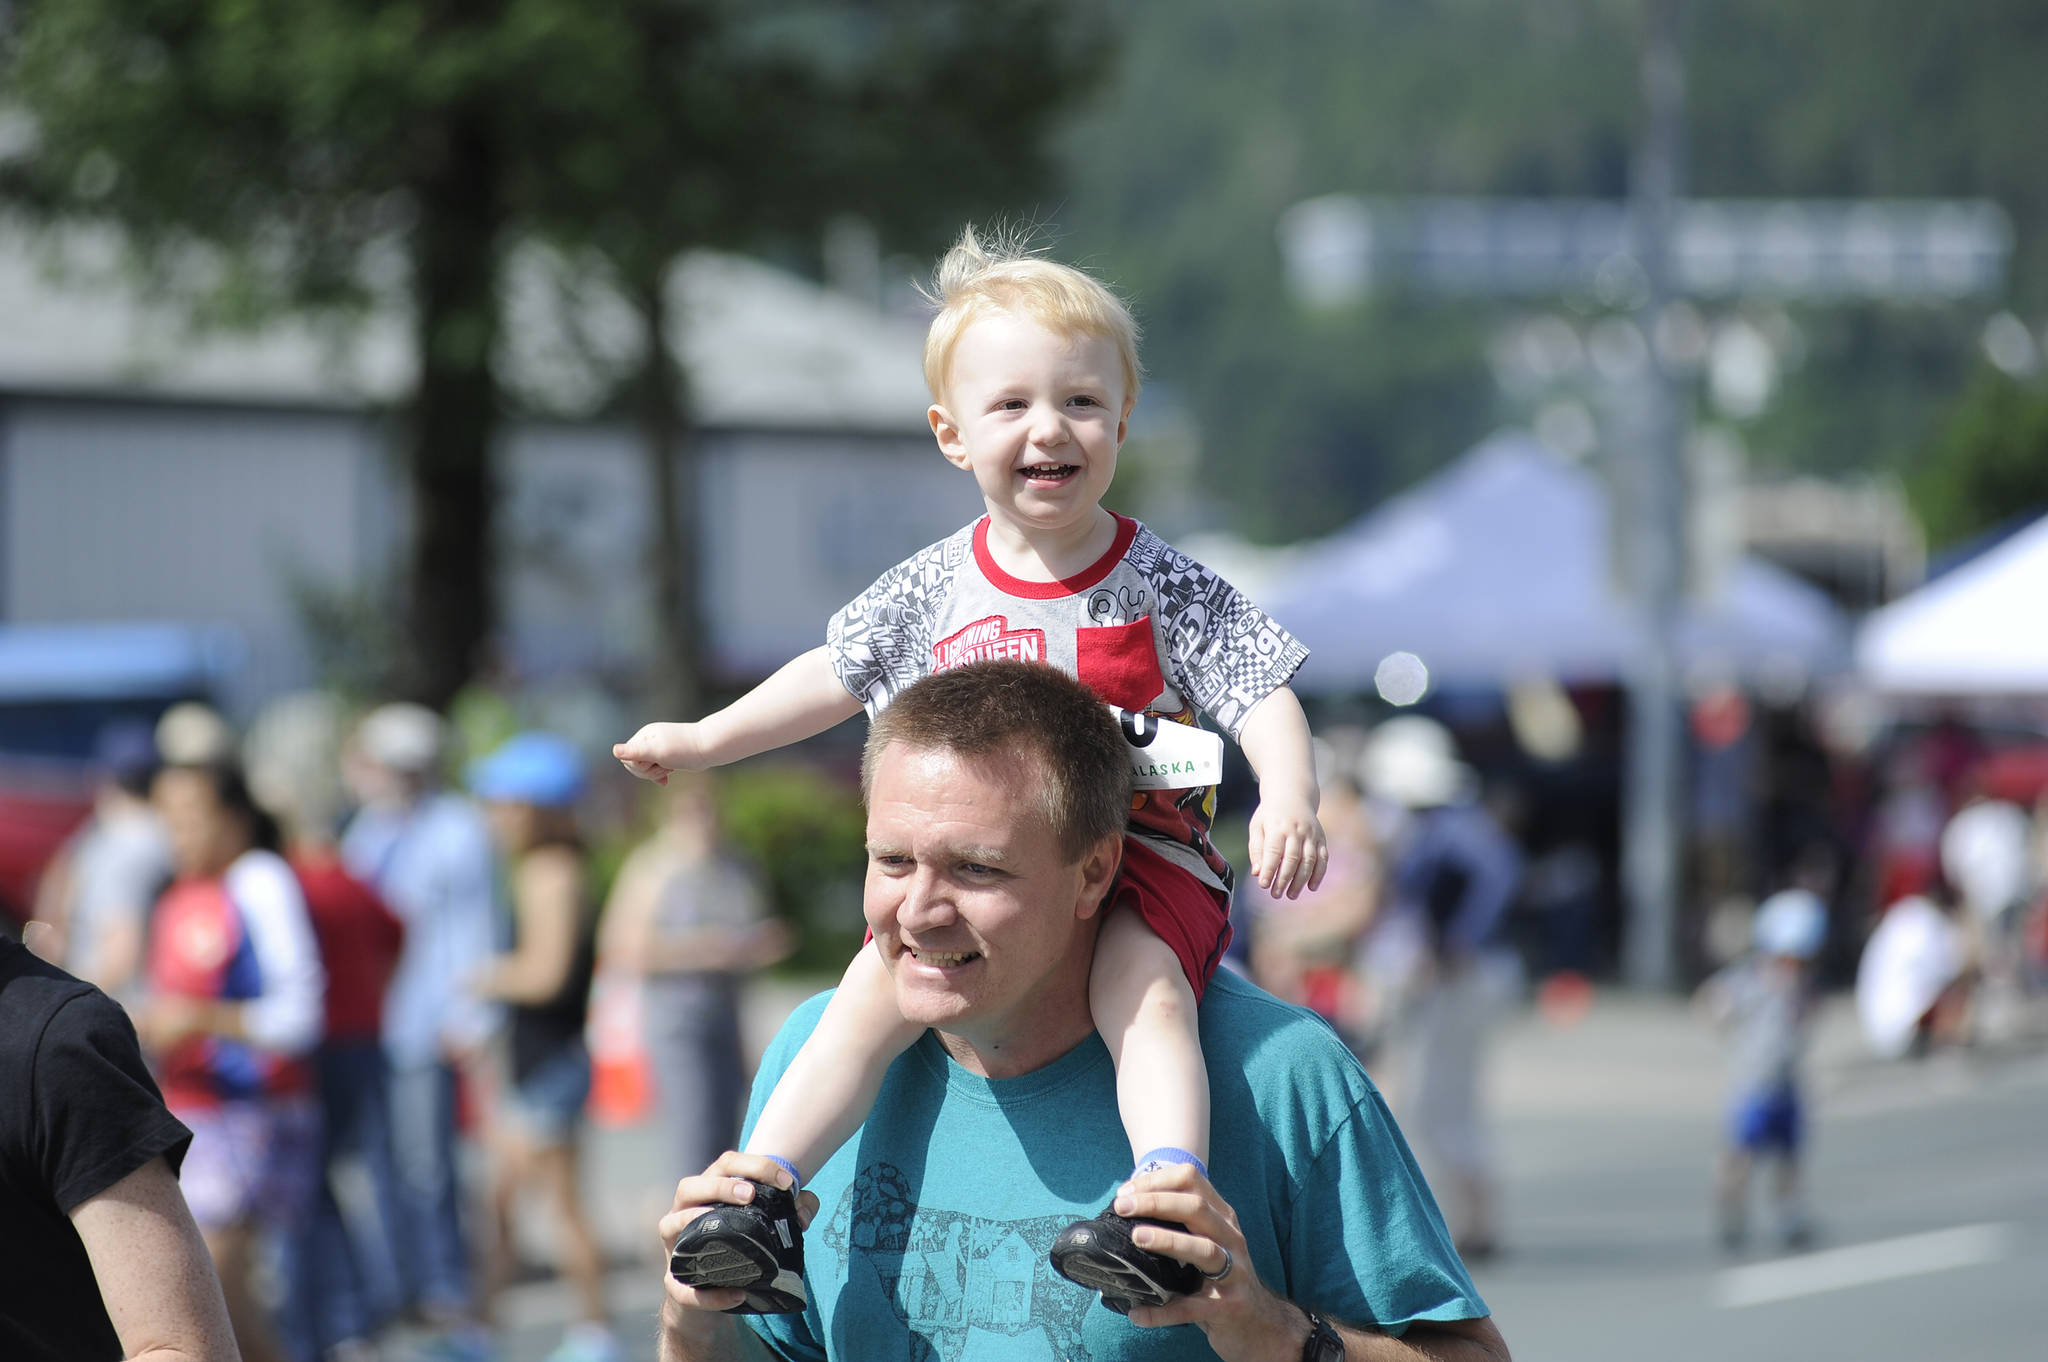 Myron Davis carries his son during the start of the Glenn Frick Memorial Mile, which took place just before the start of the Juneau Fourth of July Parade on Wednesday. (Nolin Ainsworth | Juneau Empire)